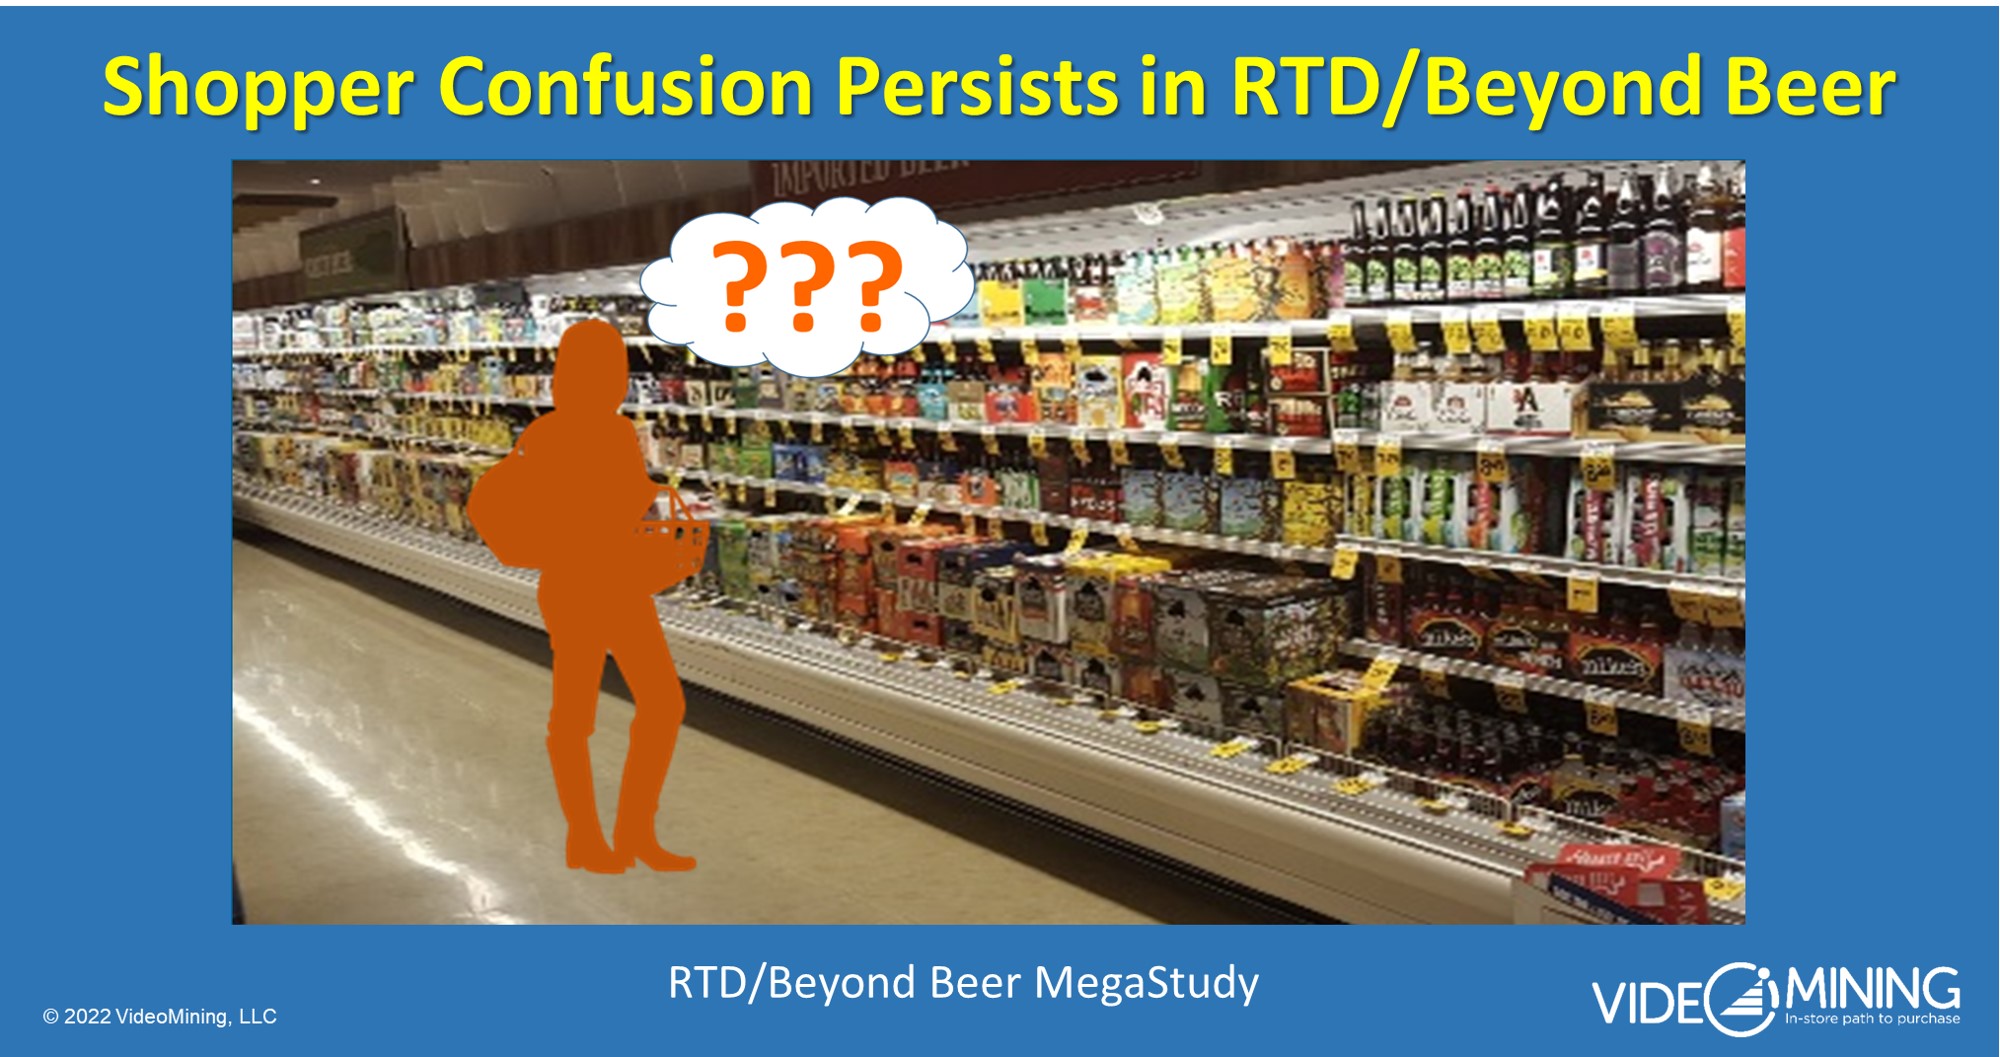 Shopper Confusion Persists in RTD/Beyond Beer